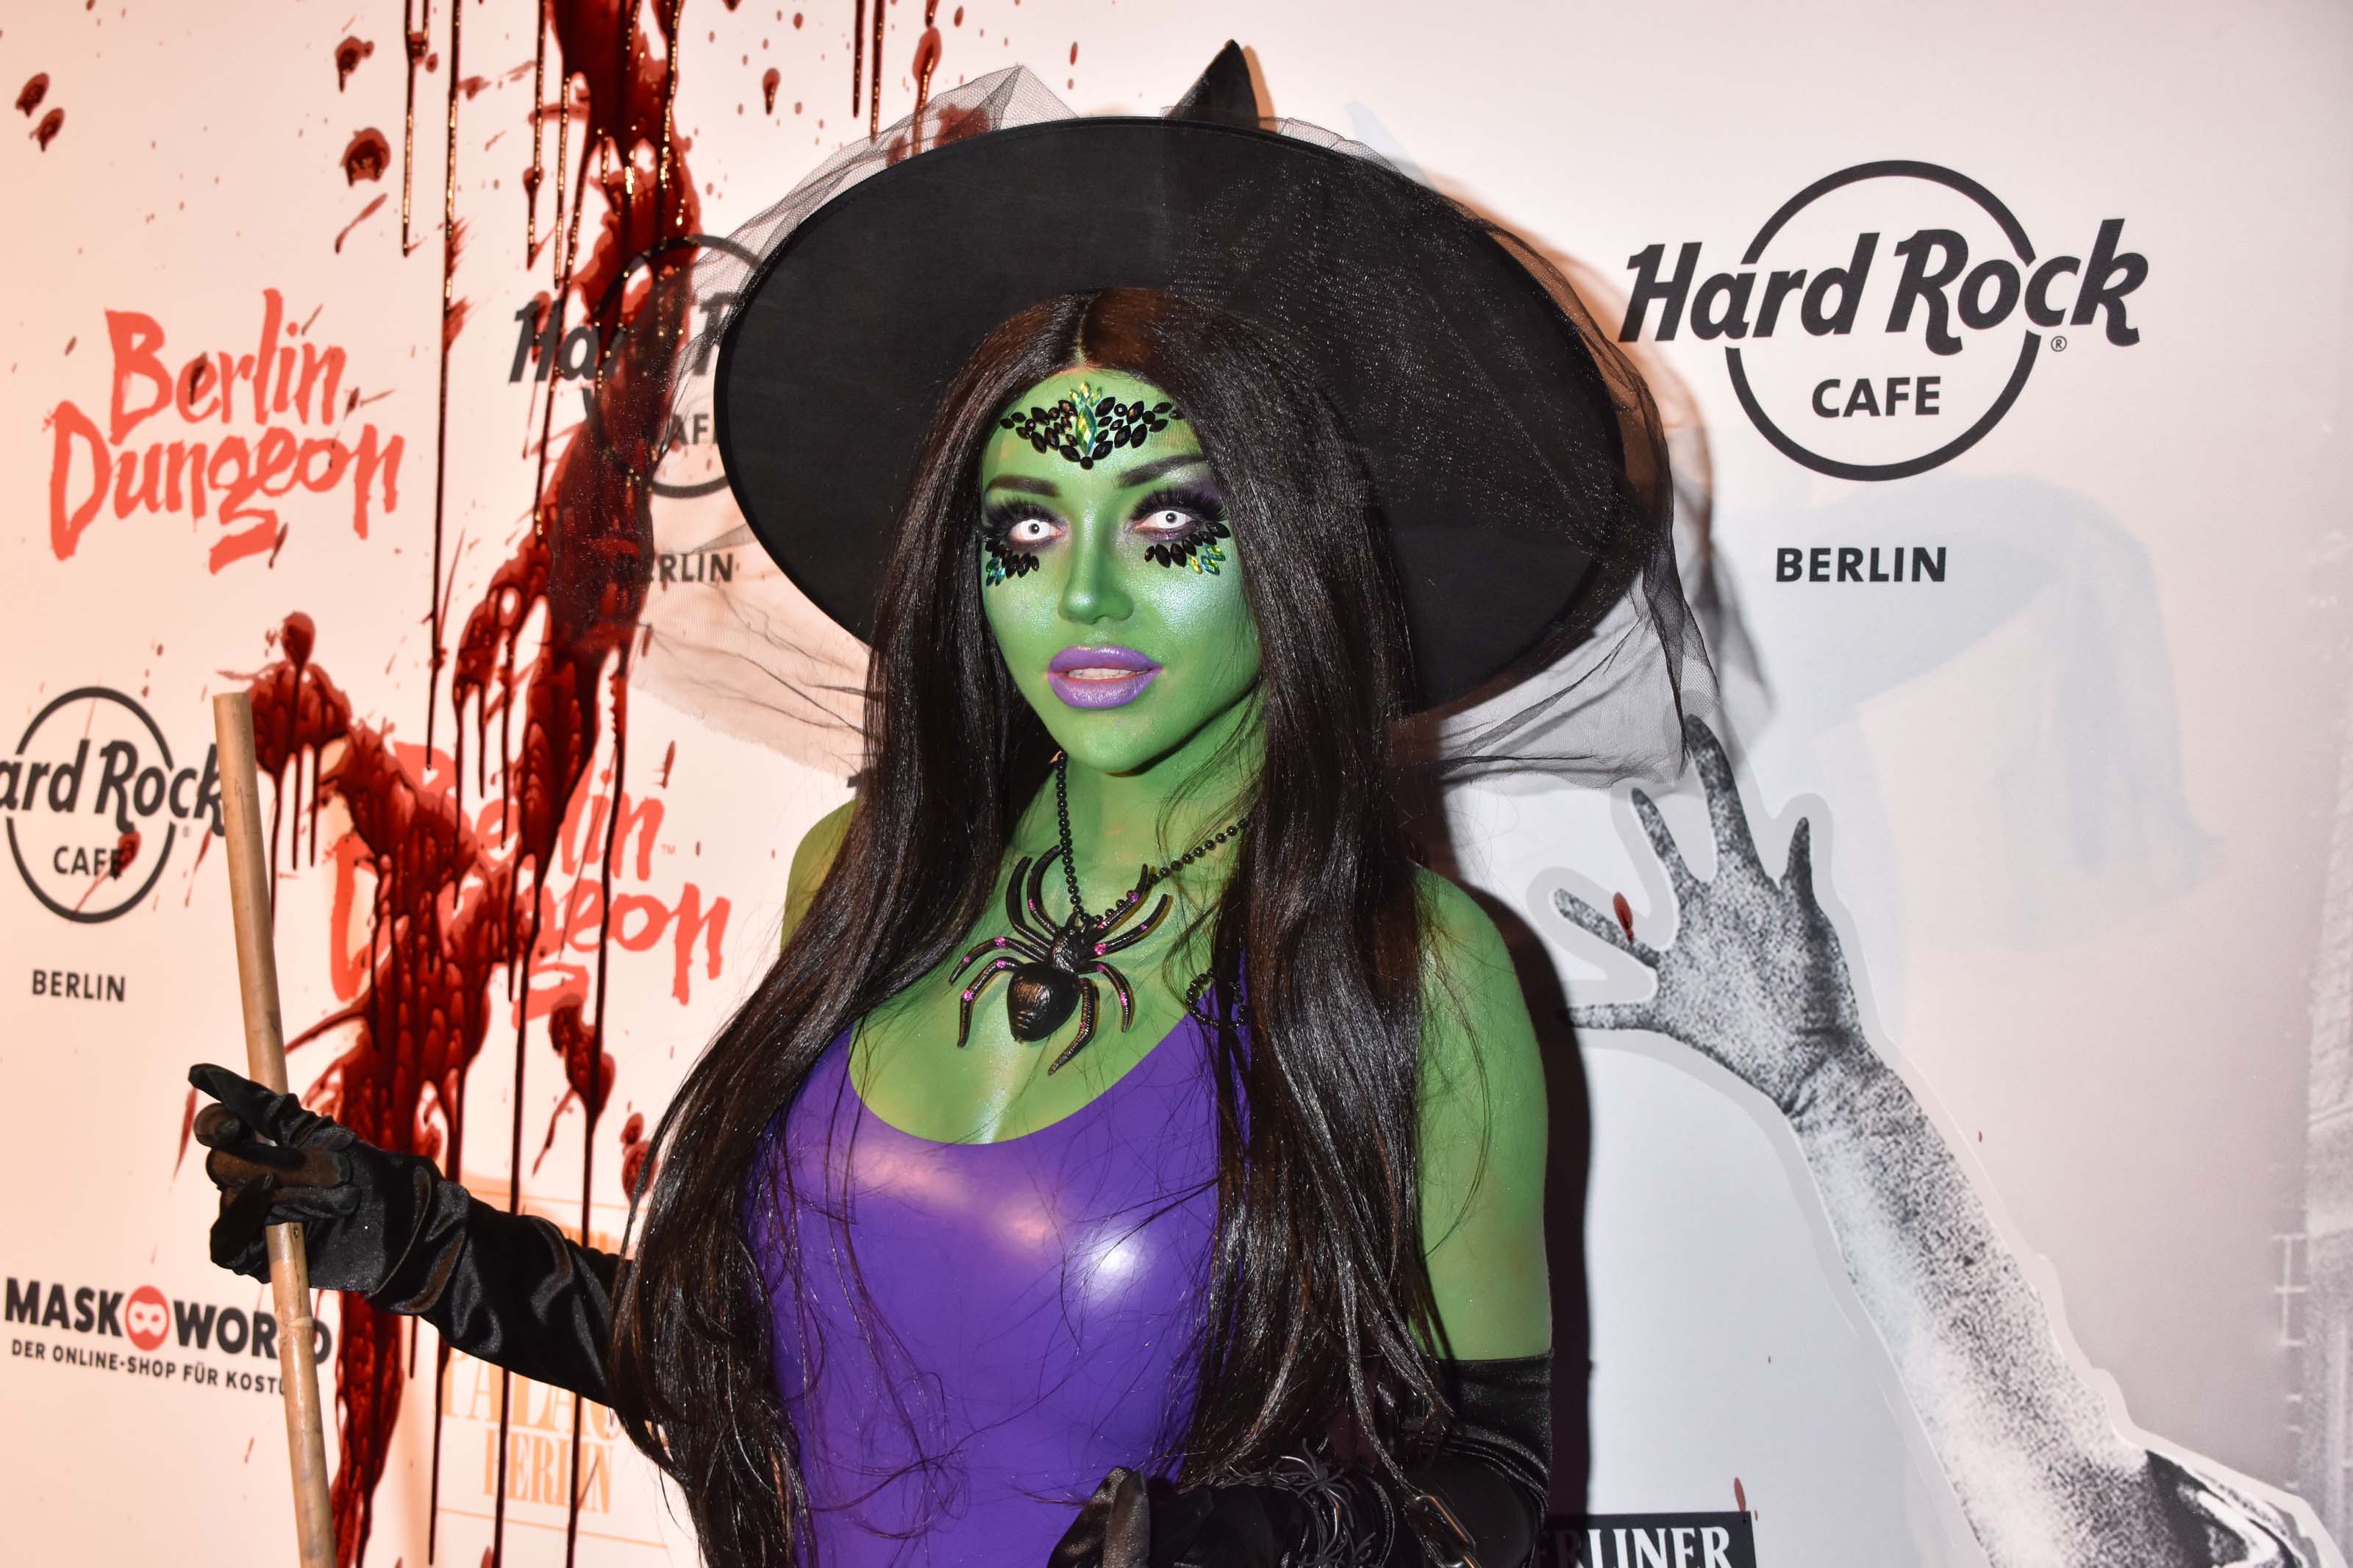 Cathy Lugner attends Halloween-Party